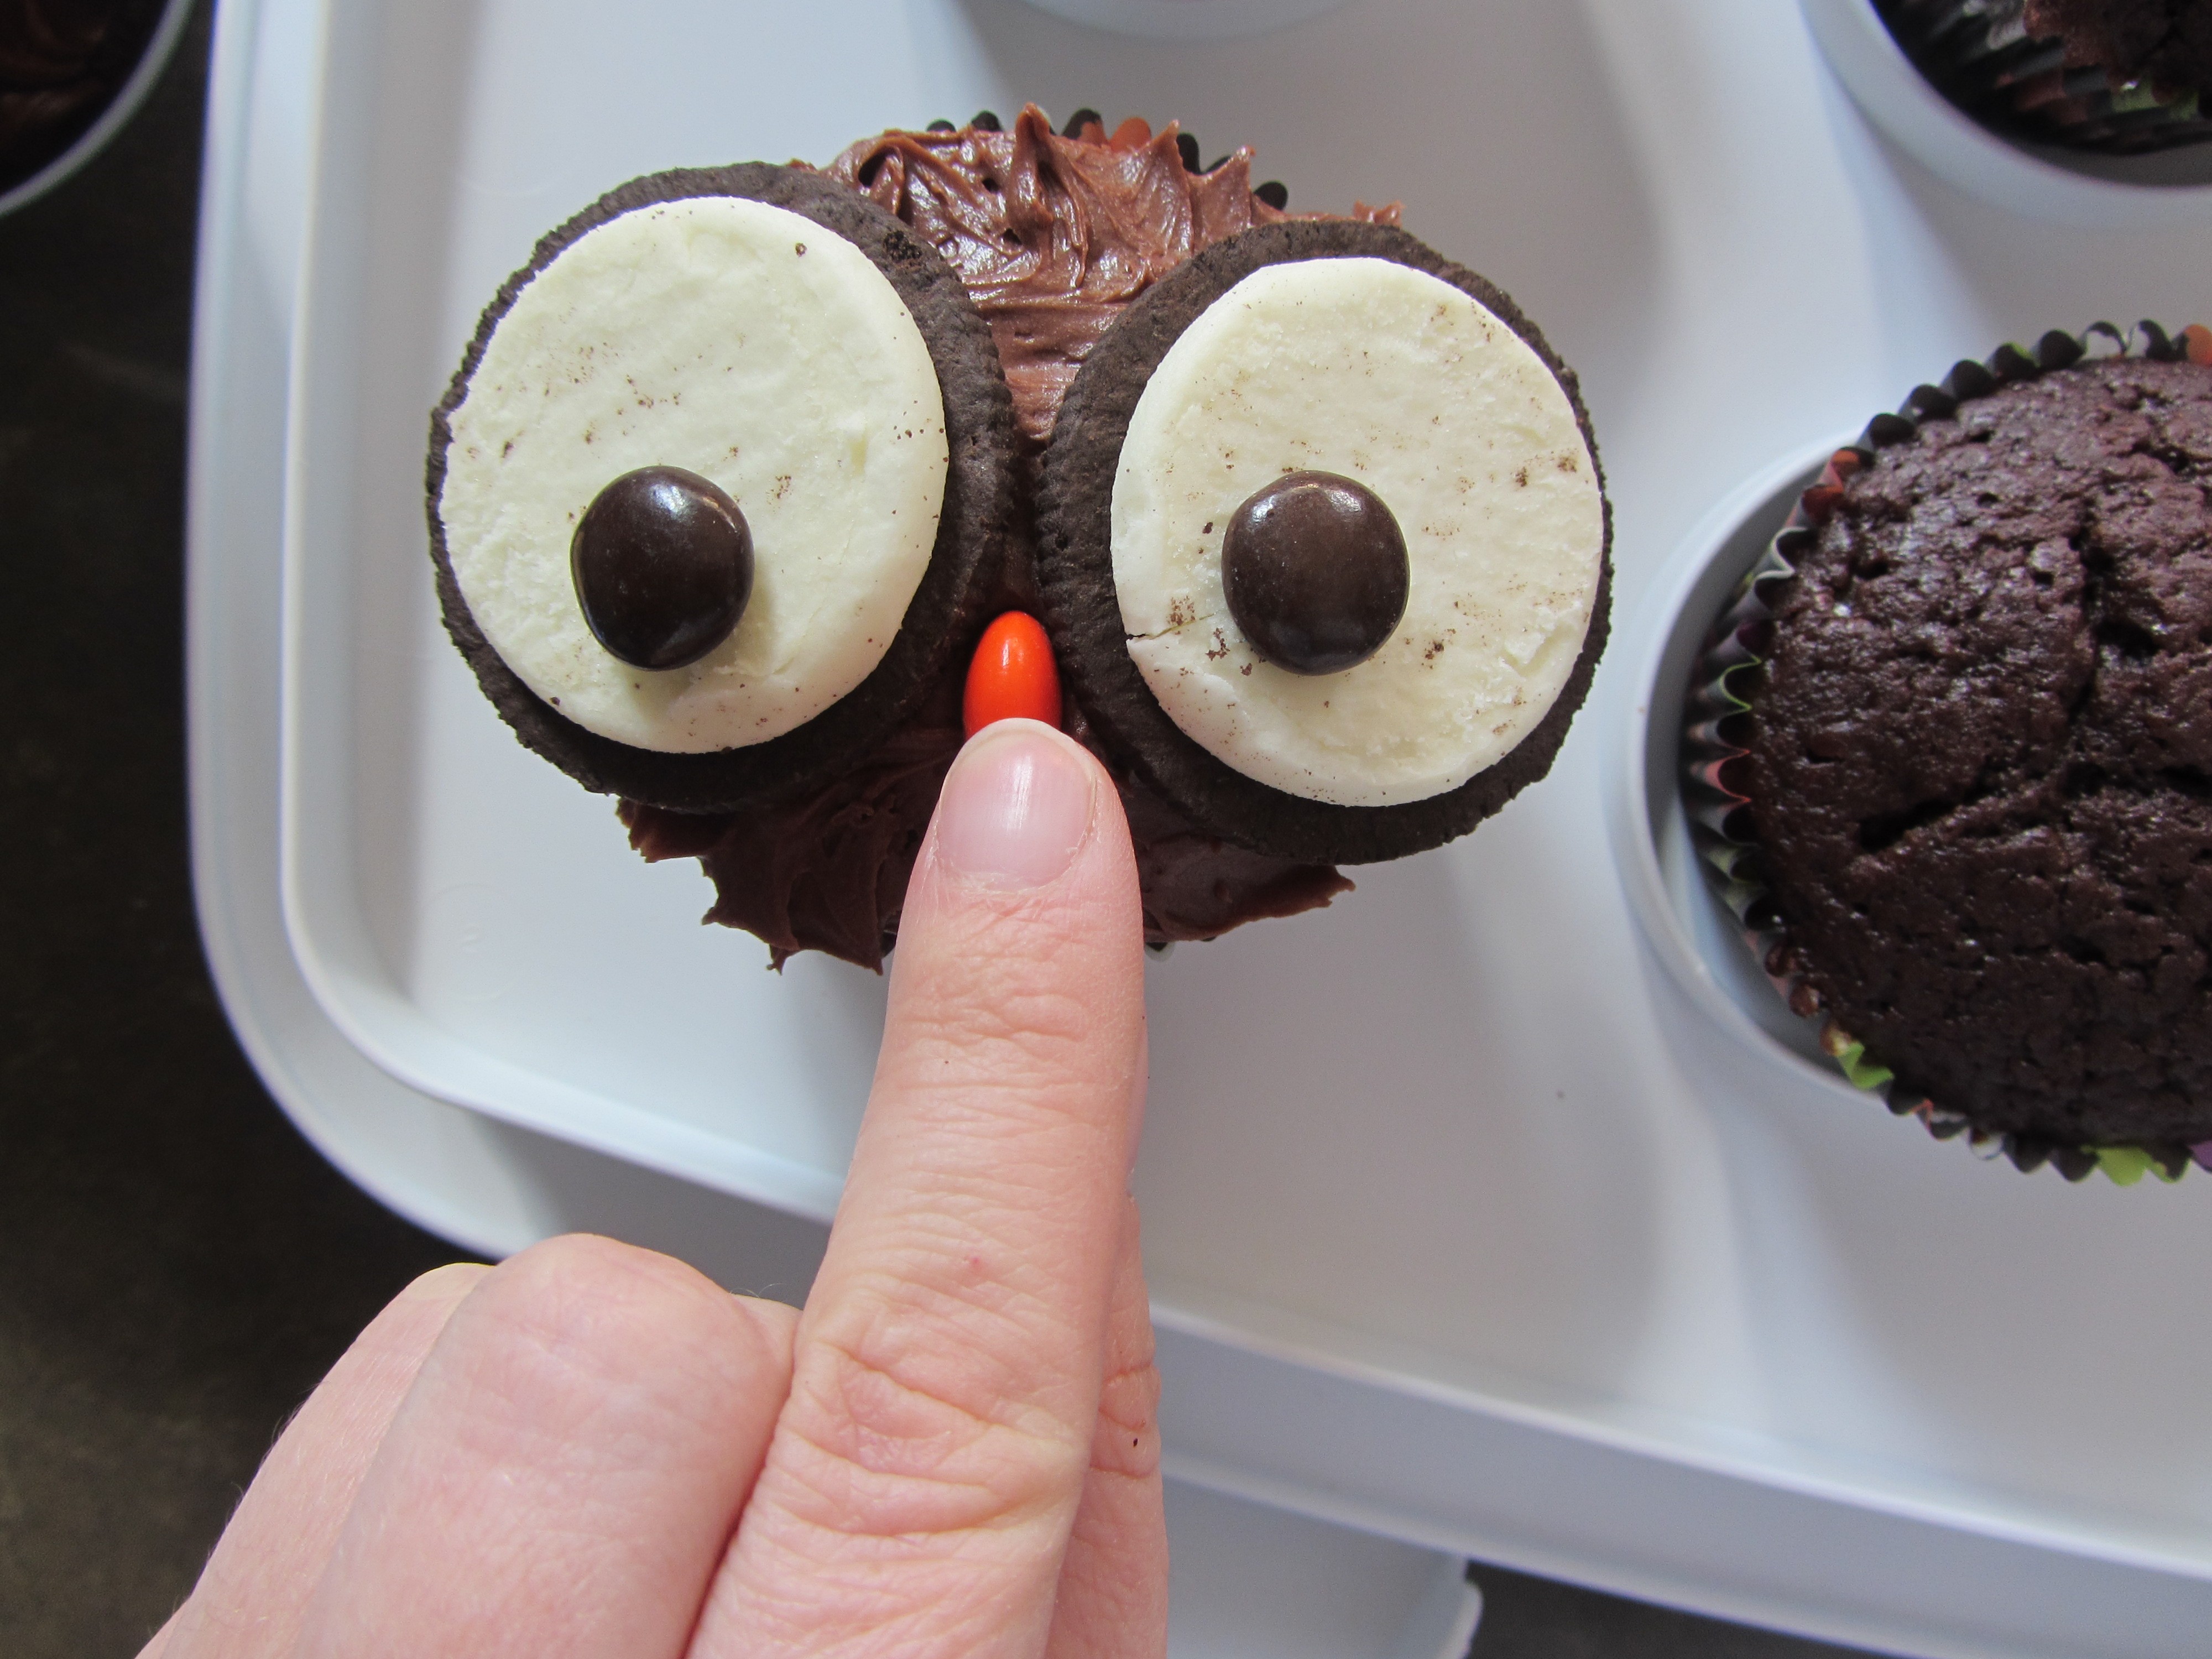 Stick on the eyes and the nose and you have yourself an owl cupcake.